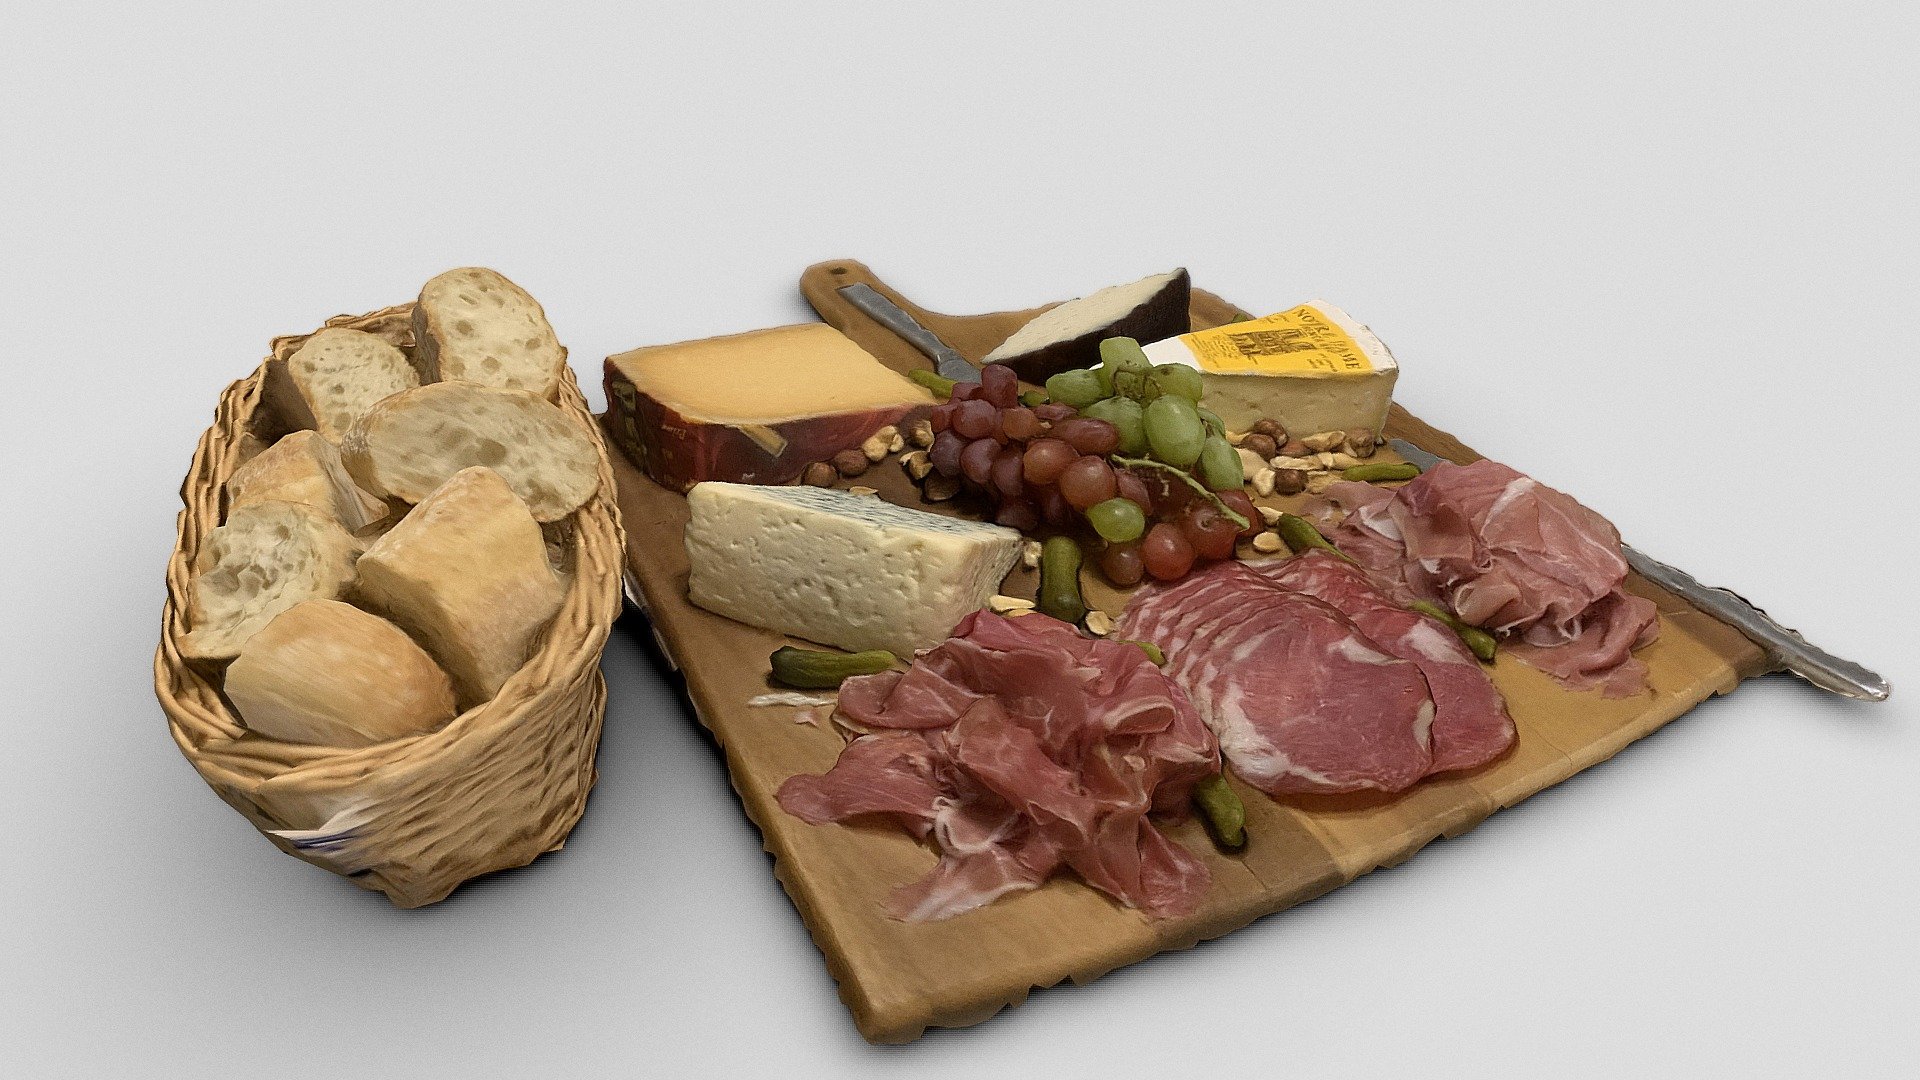 A cheese plate I made yesterday night. Pretty happy with the result given it was only 59 photos. Processed with Metashape 3d model